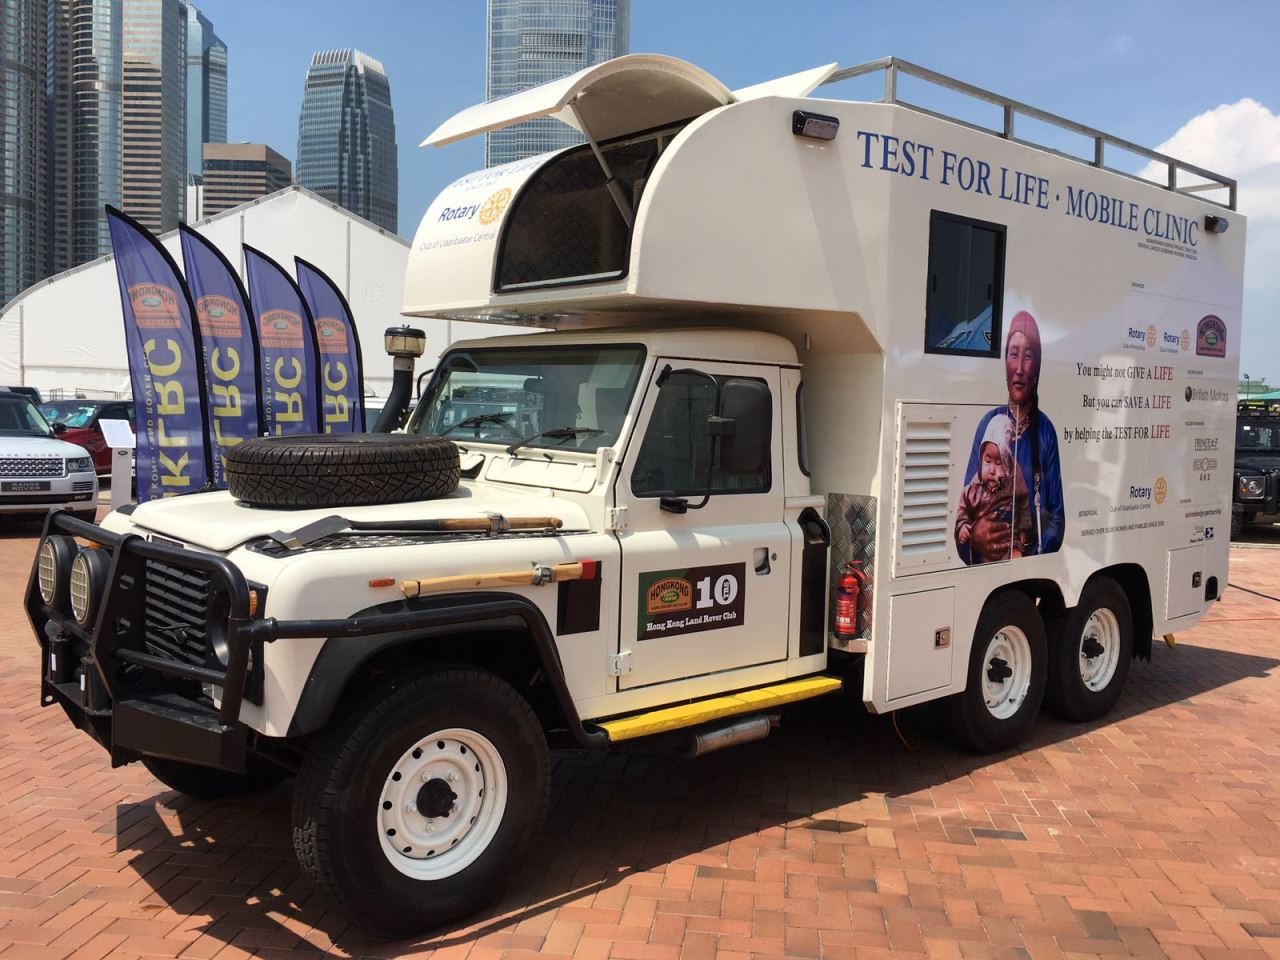 The Rotary Land Rover publicises its mission and Hong Kong origins. Photo: Handout